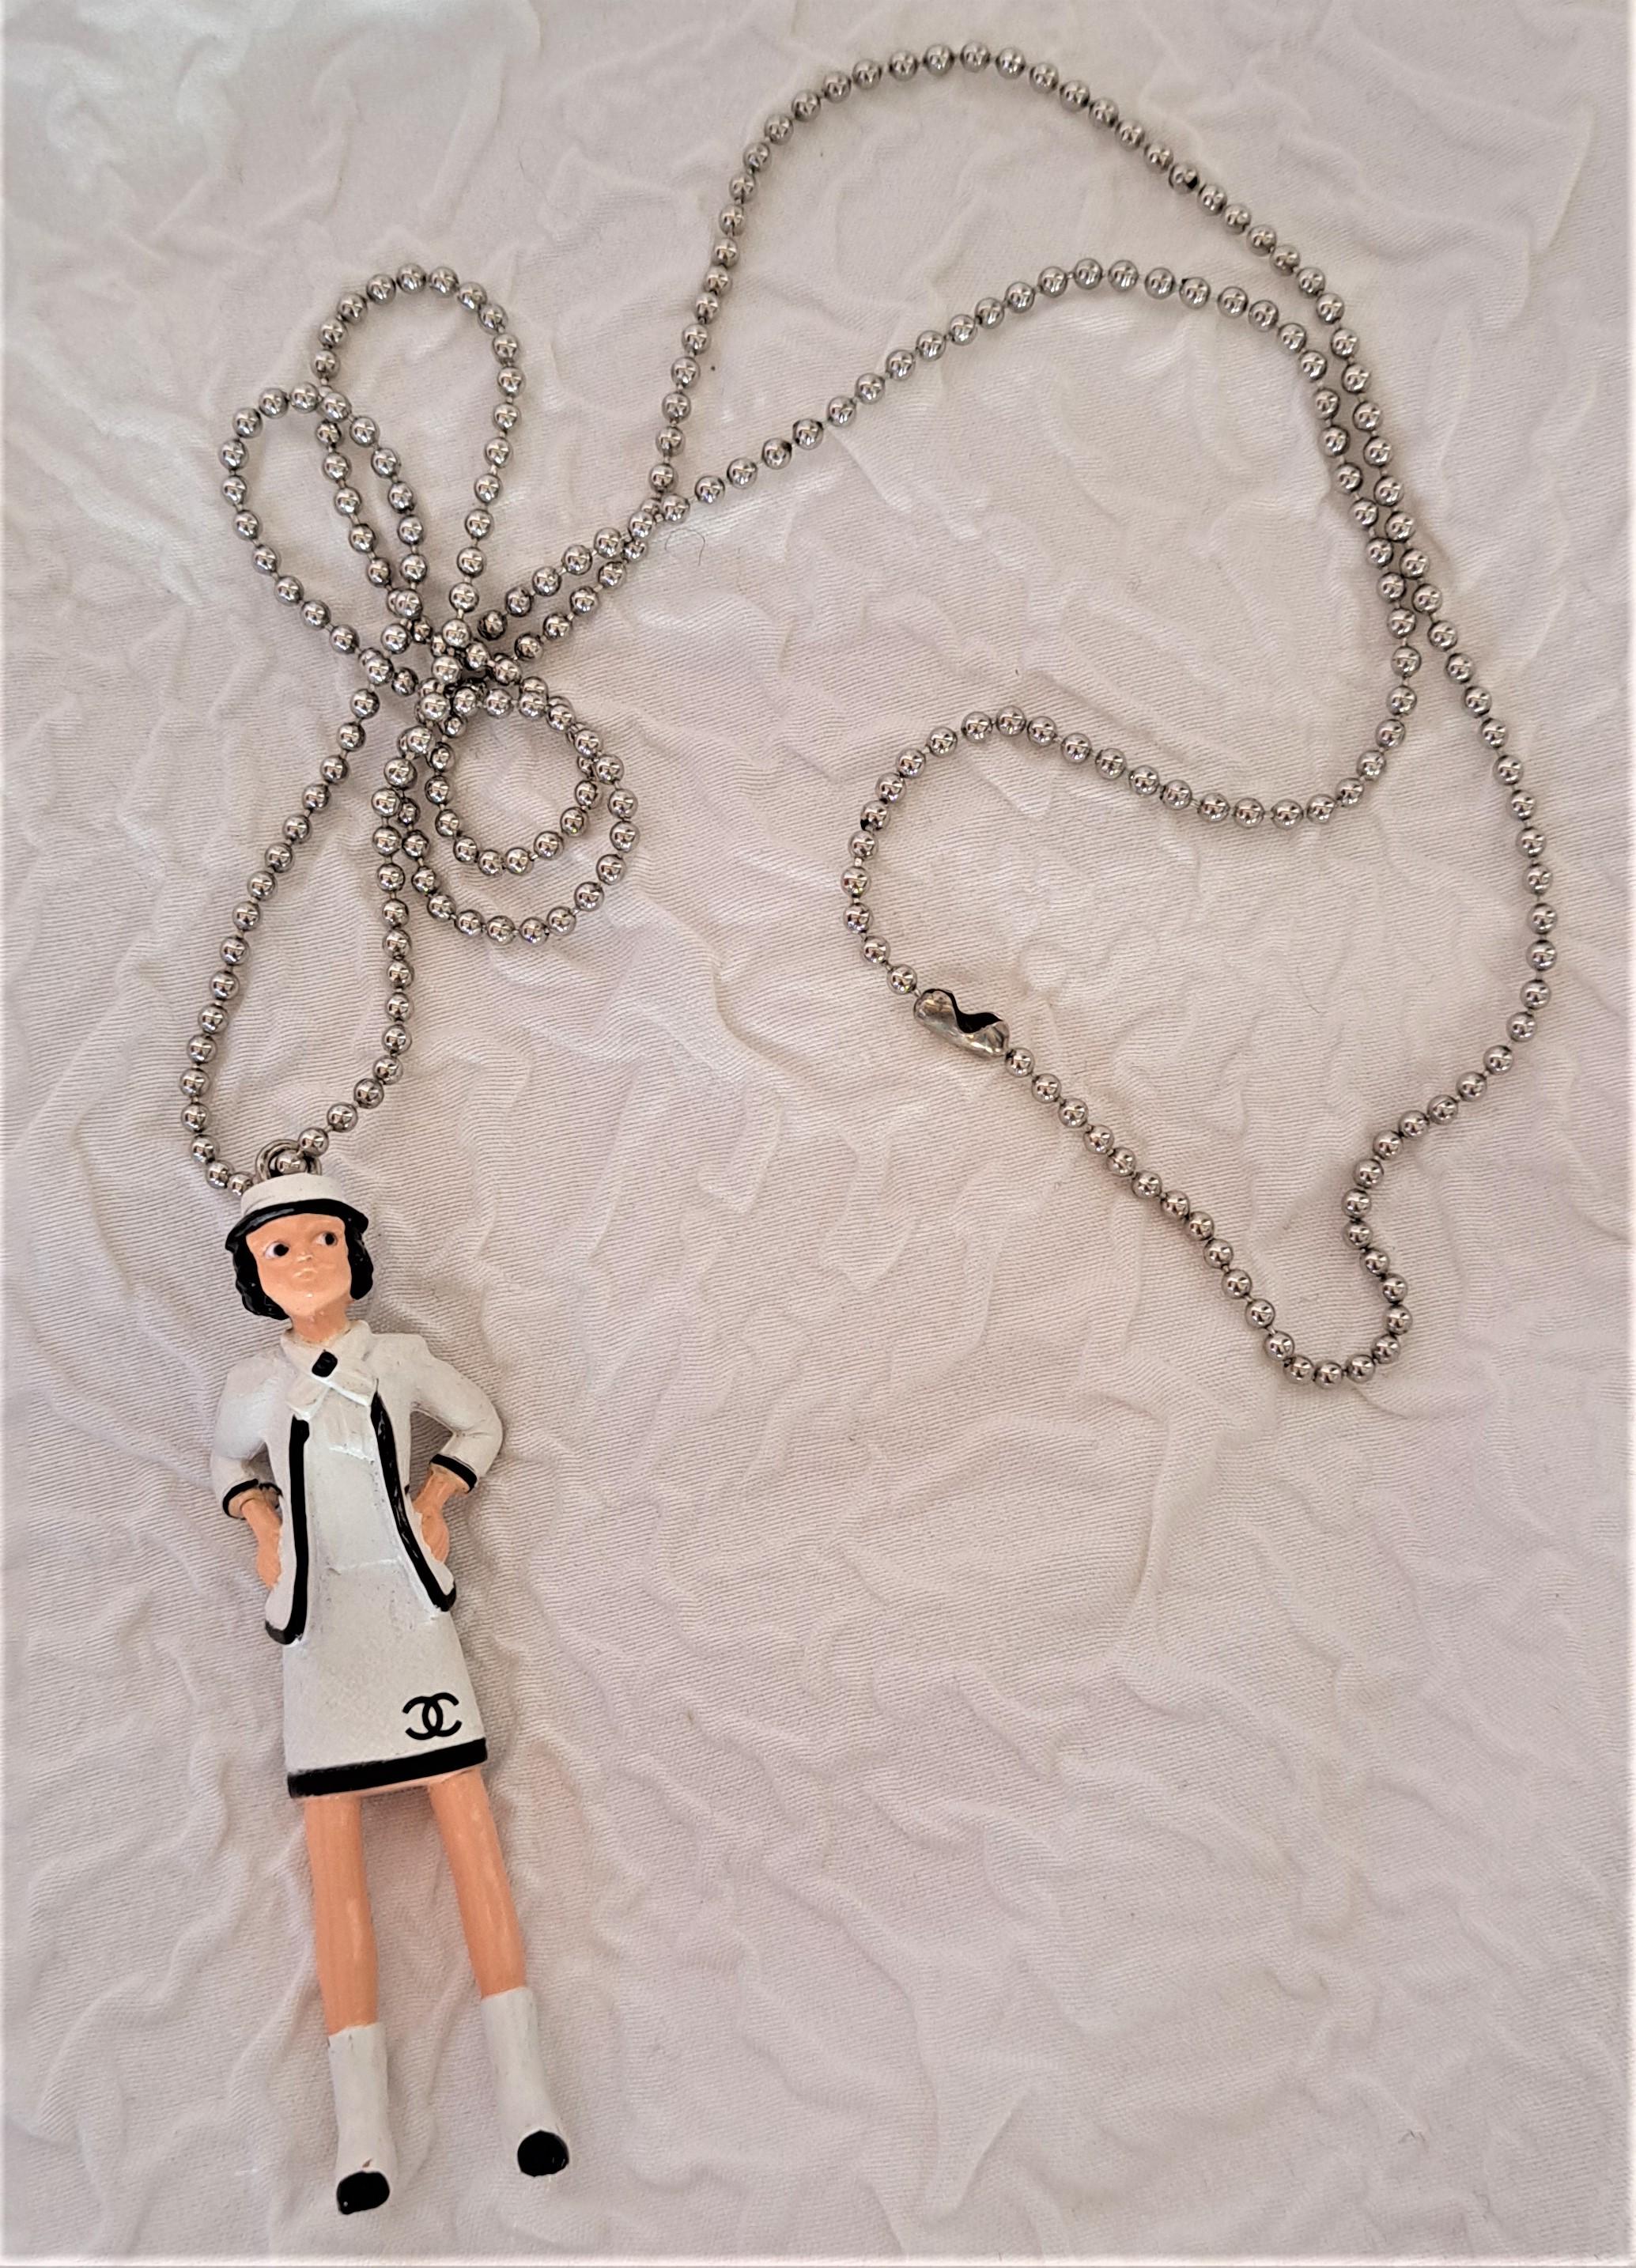 CHANEL Coco Mademoiselle Necklace LTD Edition Doll Extremely cute Limited Edition, circa 2003 CHANEL, COCO MADEMOISELLE figurine, doll bags key charm, necklace. Rare item.

This was a gift given out to only a few VIP clients at the CHANEL boutique